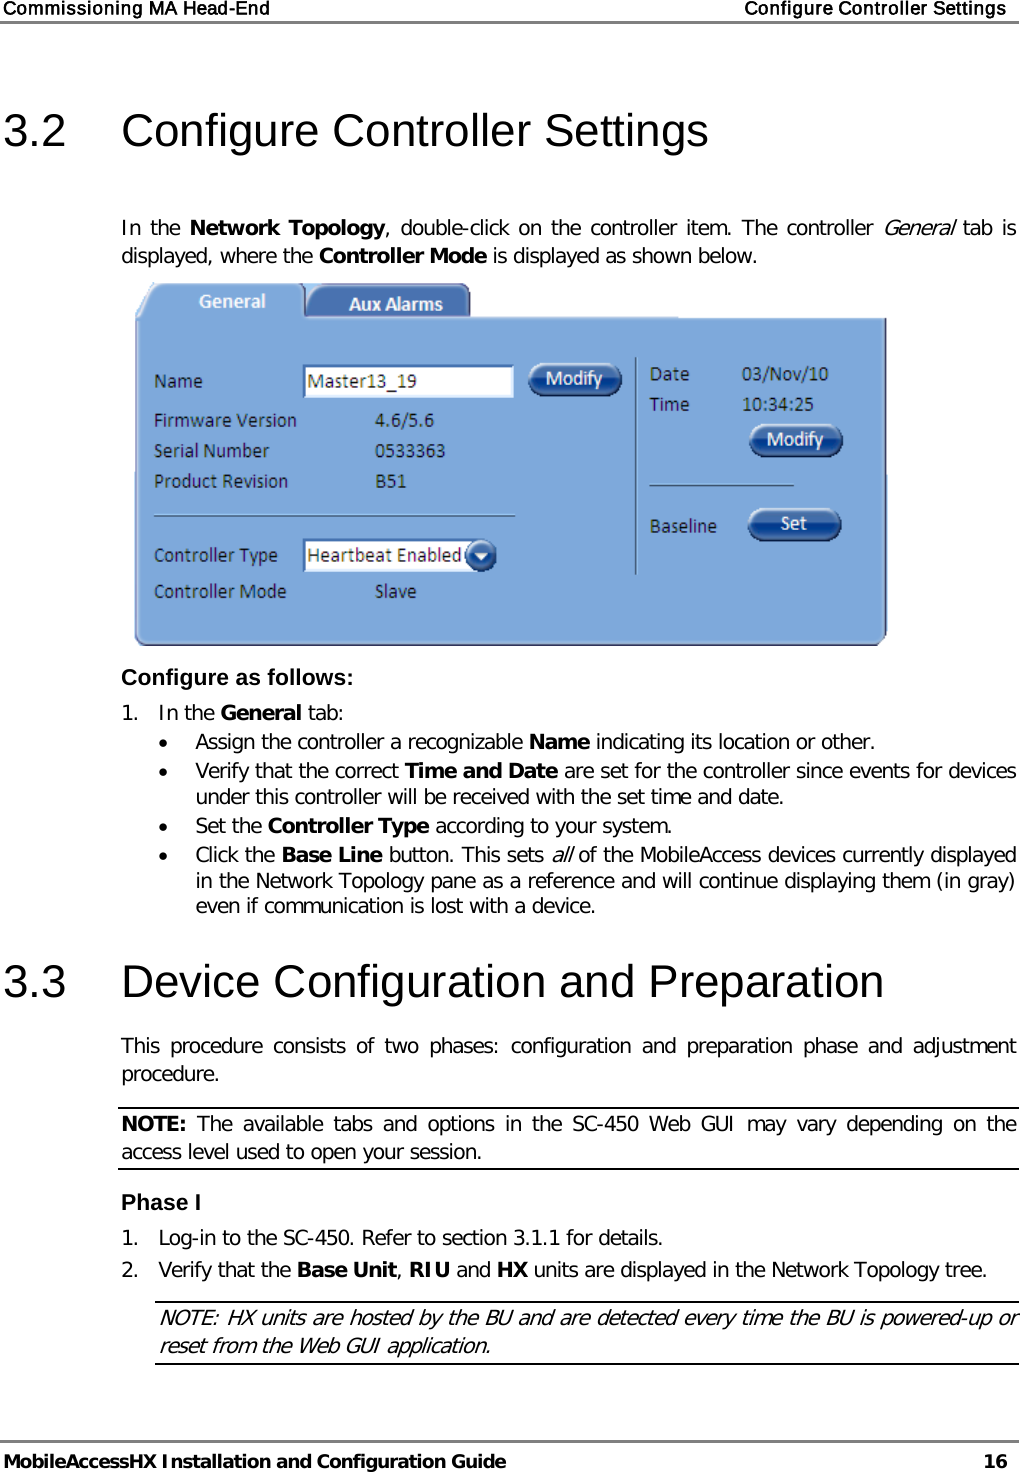 Commissioning MA Head-End    Configure Controller Settings   MobileAccessHX Installation and Configuration Guide   16  3.2  Configure Controller Settings  In the Network Topology, double-click on the controller item. The controller General tab is displayed, where the Controller Mode is displayed as shown below.  Configure as follows: 1.  In the General tab: • Assign the controller a recognizable Name indicating its location or other.  • Verify that the correct Time and Date are set for the controller since events for devices under this controller will be received with the set time and date. • Set the Controller Type according to your system. • Click the Base Line button. This sets all of the MobileAccess devices currently displayed in the Network Topology pane as a reference and will continue displaying them (in gray) even if communication is lost with a device. 3.3  Device Configuration and Preparation This procedure consists of two phases: configuration and preparation phase and adjustment procedure. NOTE: The available tabs and options in the SC-450 Web GUI may vary depending on the access level used to open your session. Phase I 1.  Log-in to the SC-450. Refer to section  3.1.1 for details. 2.  Verify that the Base Unit, RIU and HX units are displayed in the Network Topology tree. NOTE: HX units are hosted by the BU and are detected every time the BU is powered-up or reset from the Web GUI application. 